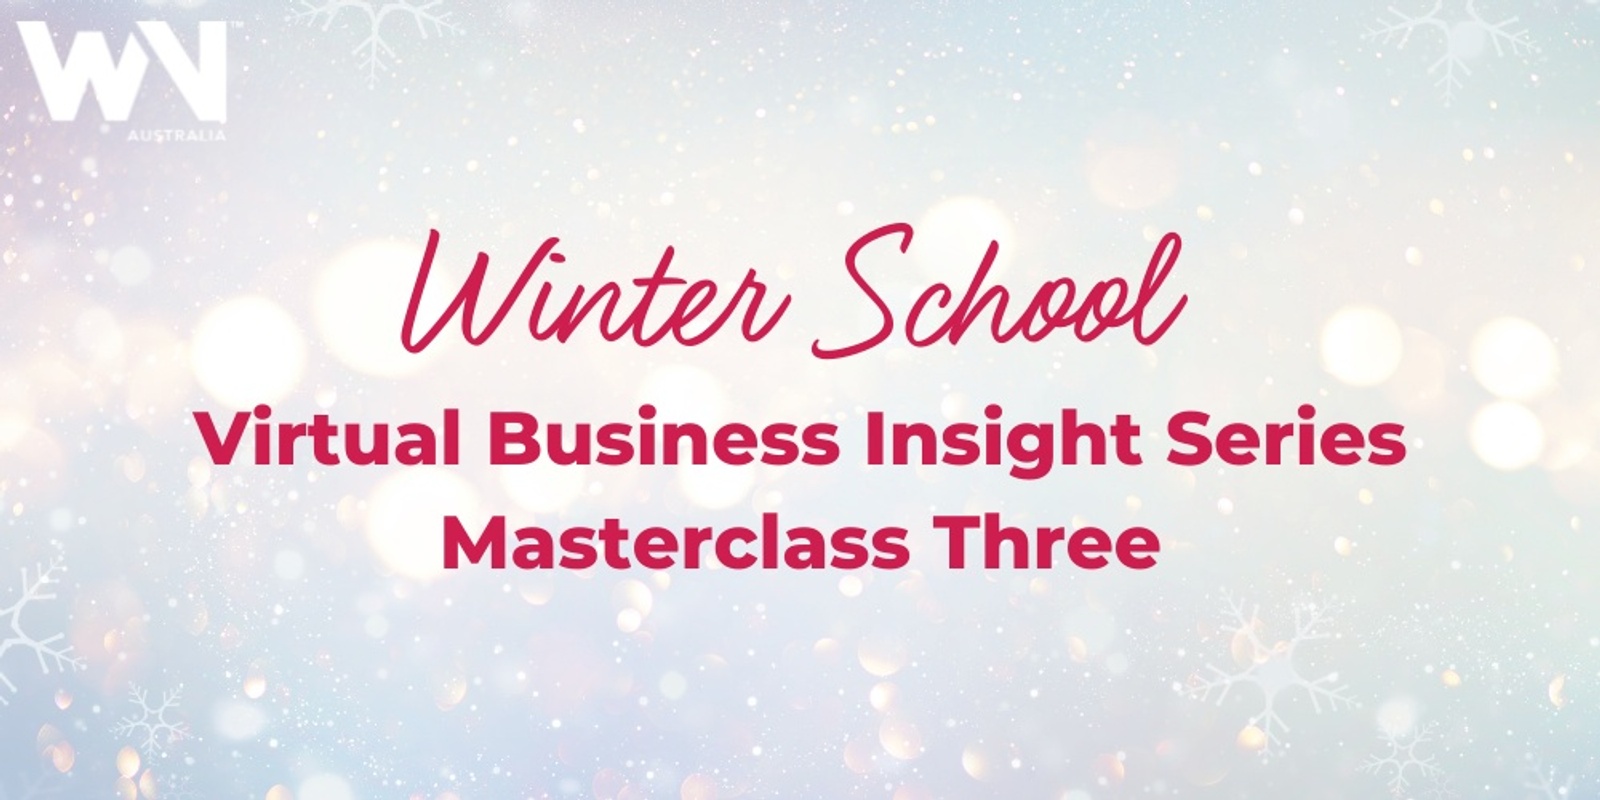 Banner image for Masterclass Three: Winter School Virtual Business Insight Series